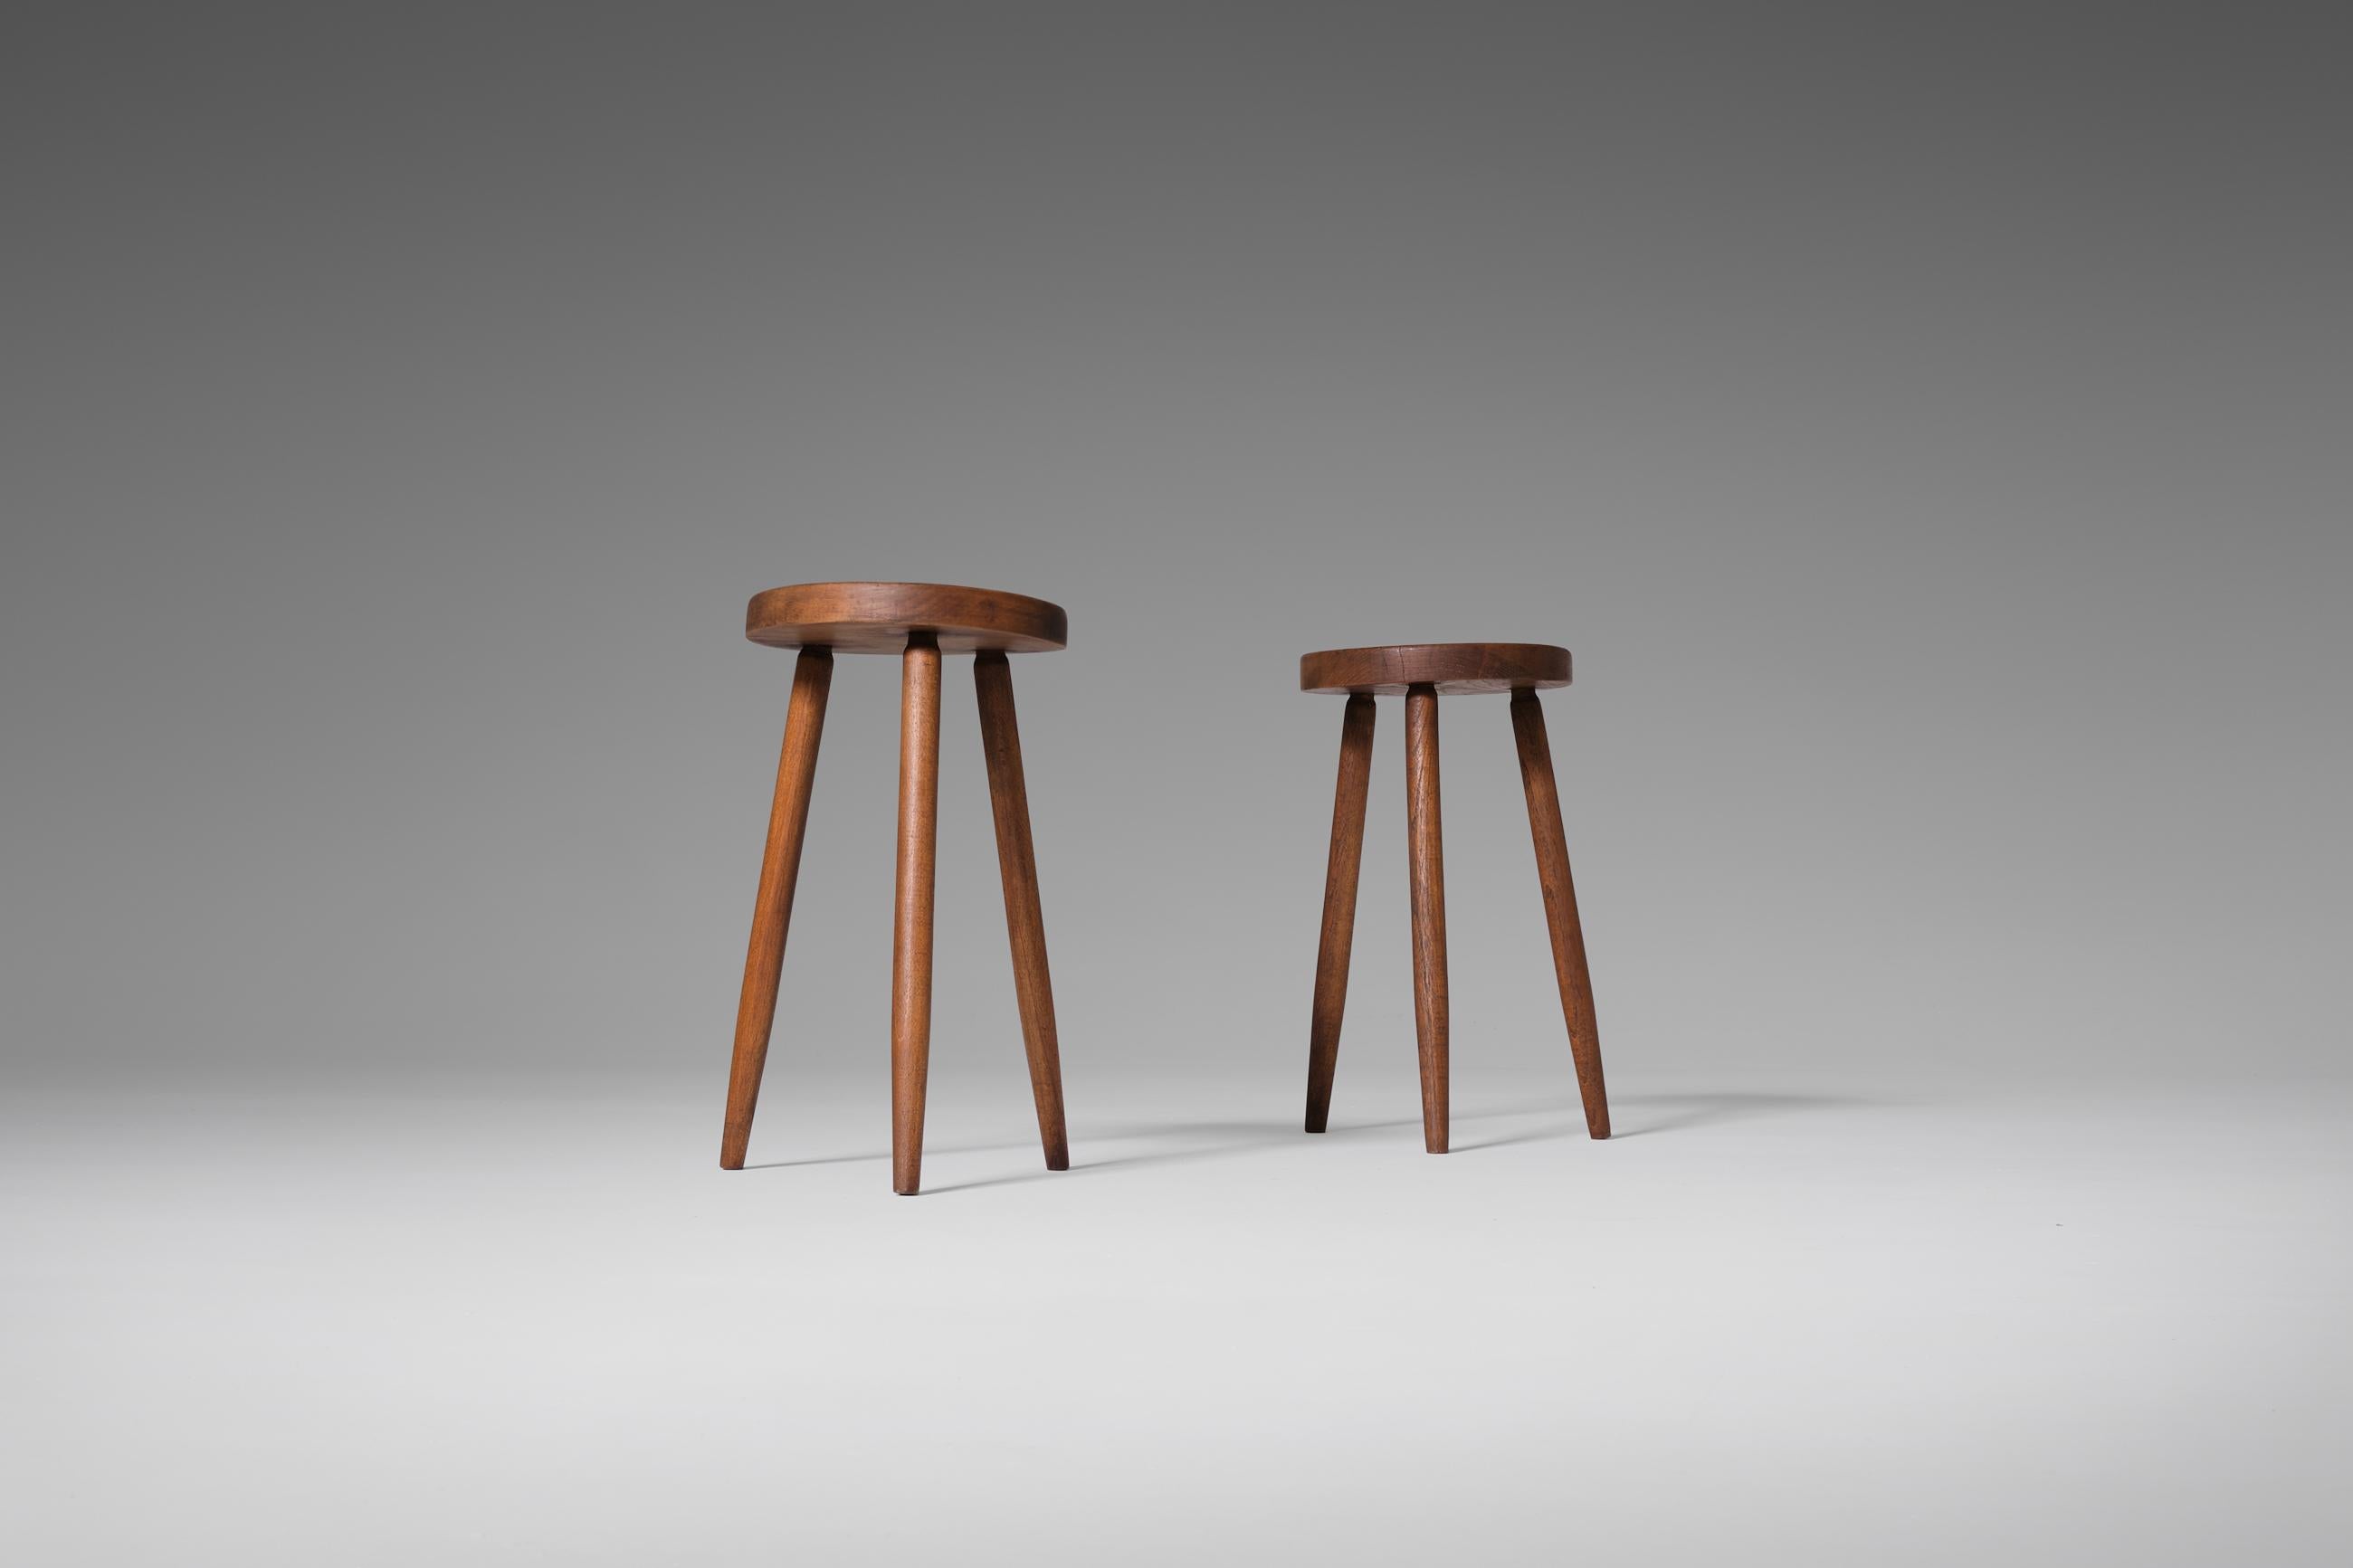 Pair of oak stools, 1960s. Elegant and refined pair made in solid oak. Characteristic for the stools are the nice subtle long thin tapered shaped legs. The solid oak shows a beautiful patina. In good original condition.